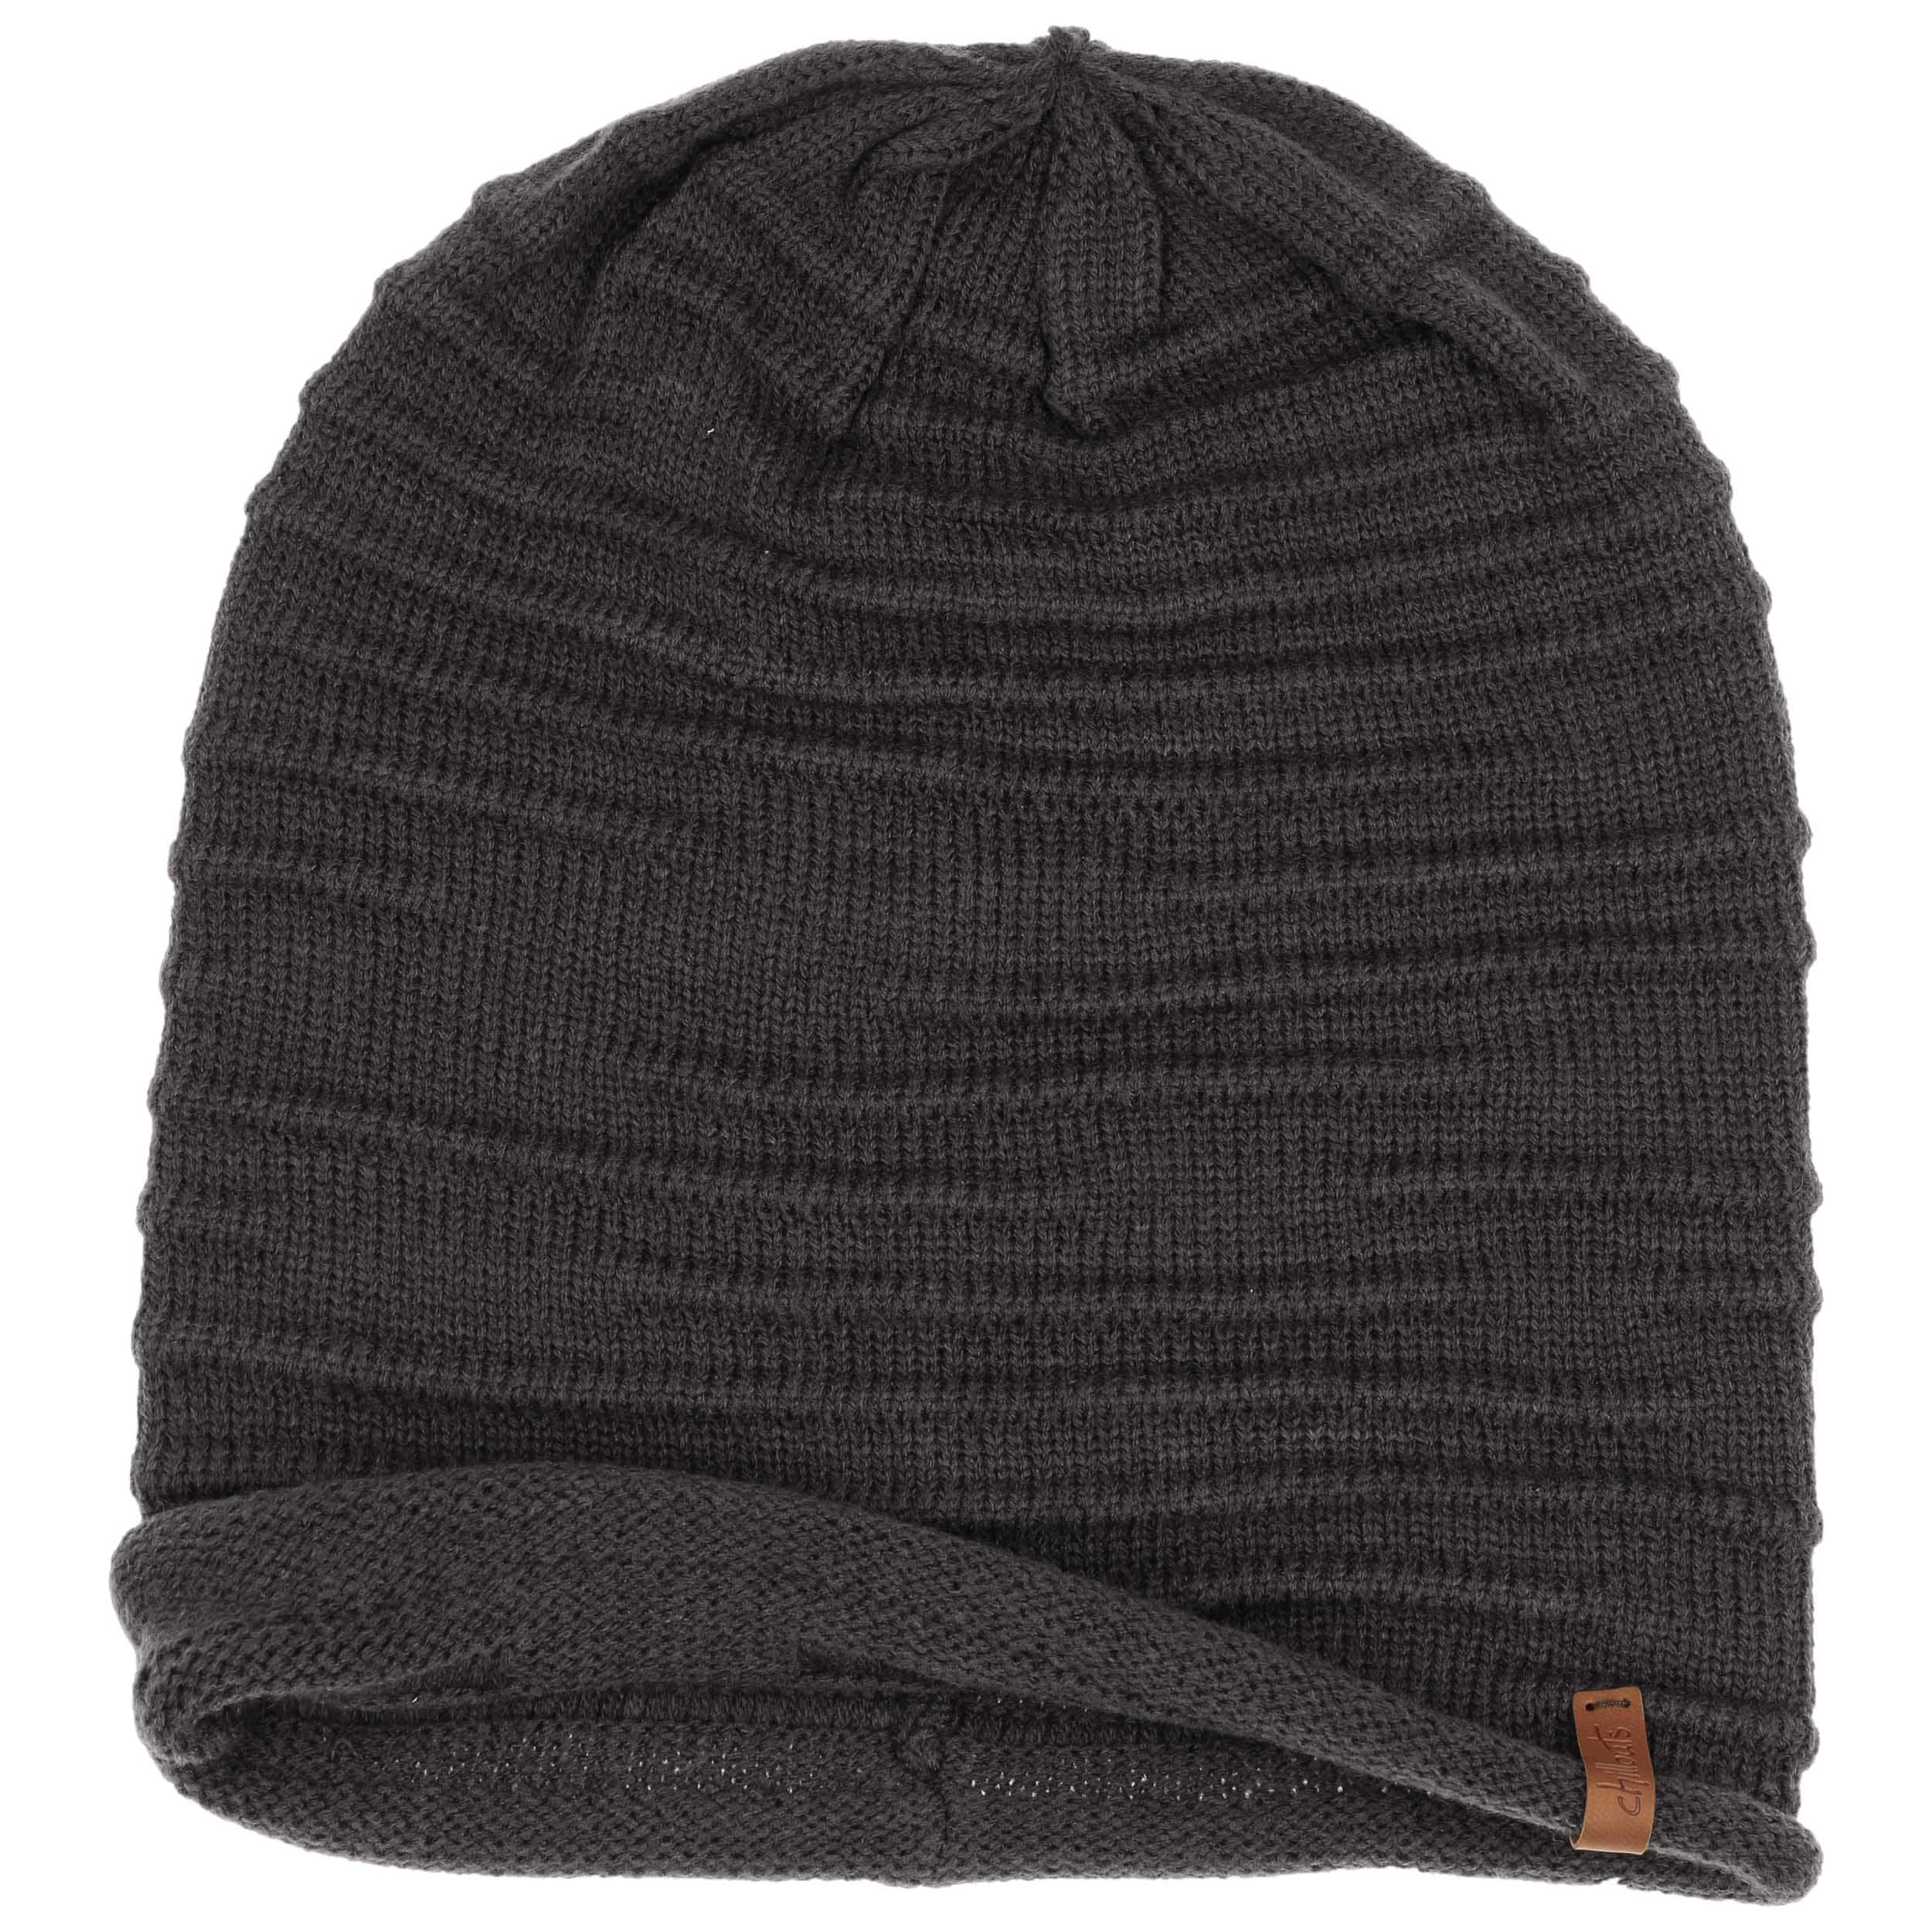 Aarony Long Beanie 19,95 € Chillouts by Strickmütze 